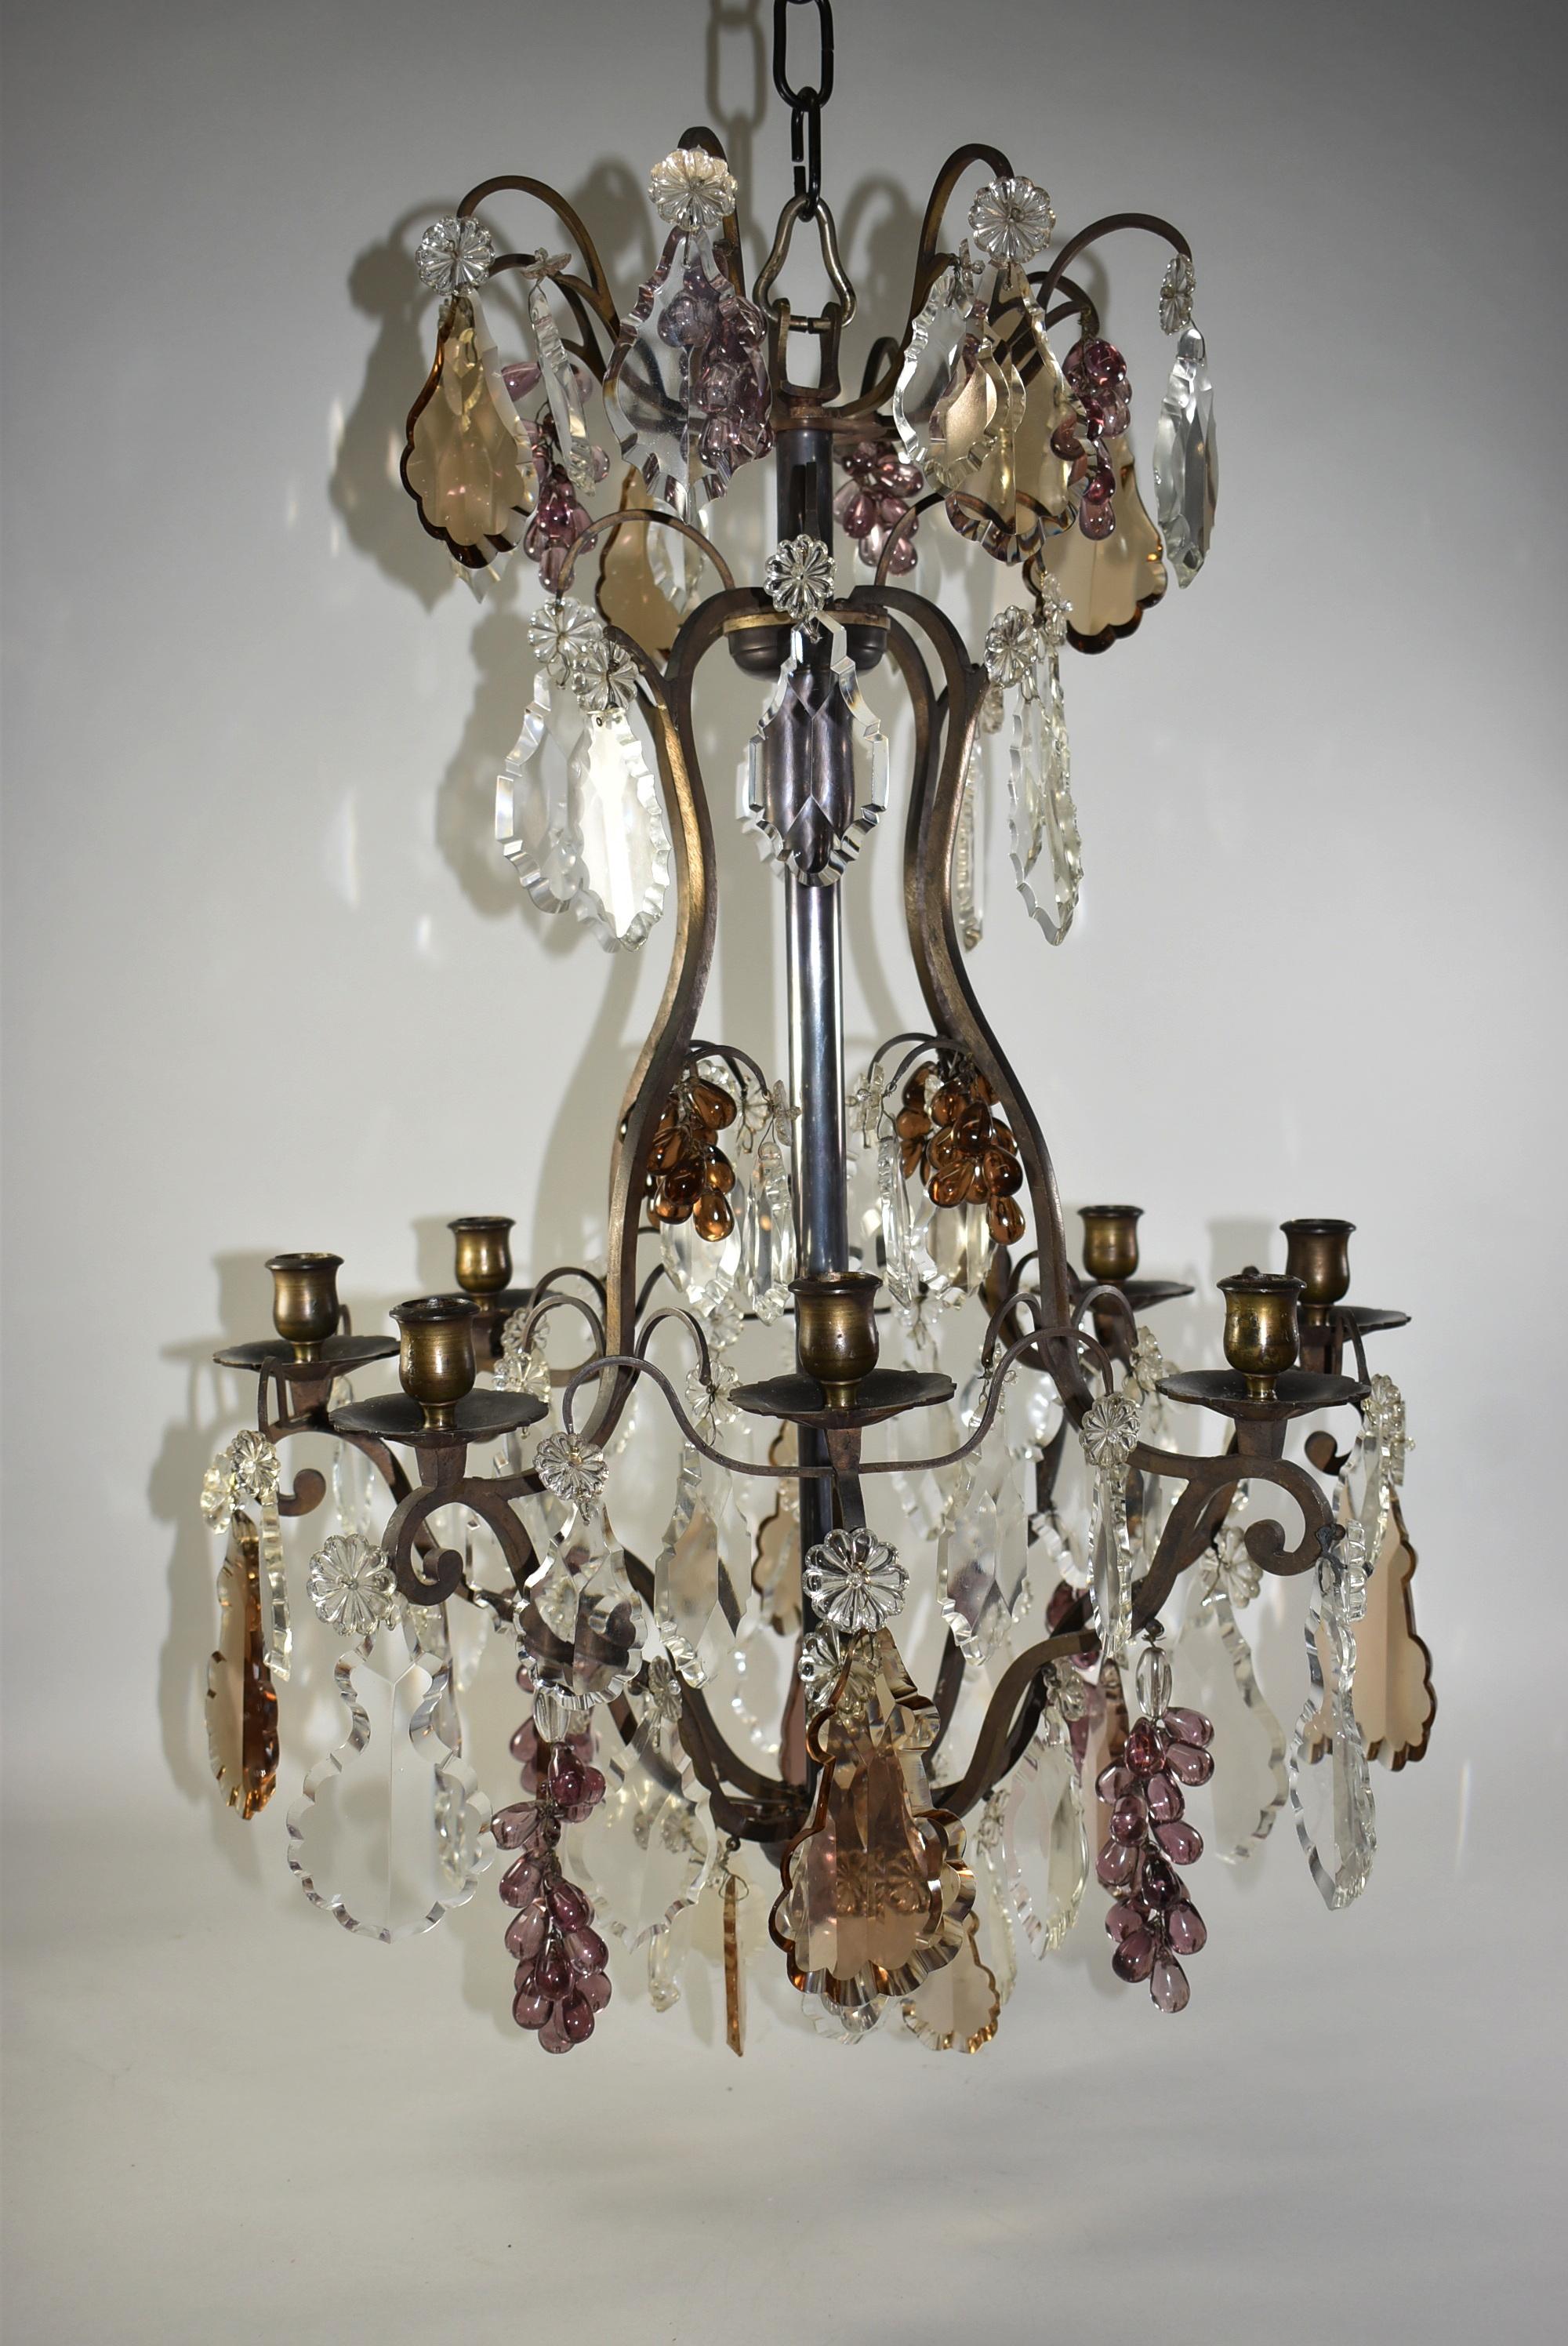 Italian Genovese candle non electric chandelier with eight arms. Bronze tone frame holds decorative crystal flowers and clusters of purple and amber grapes. 20